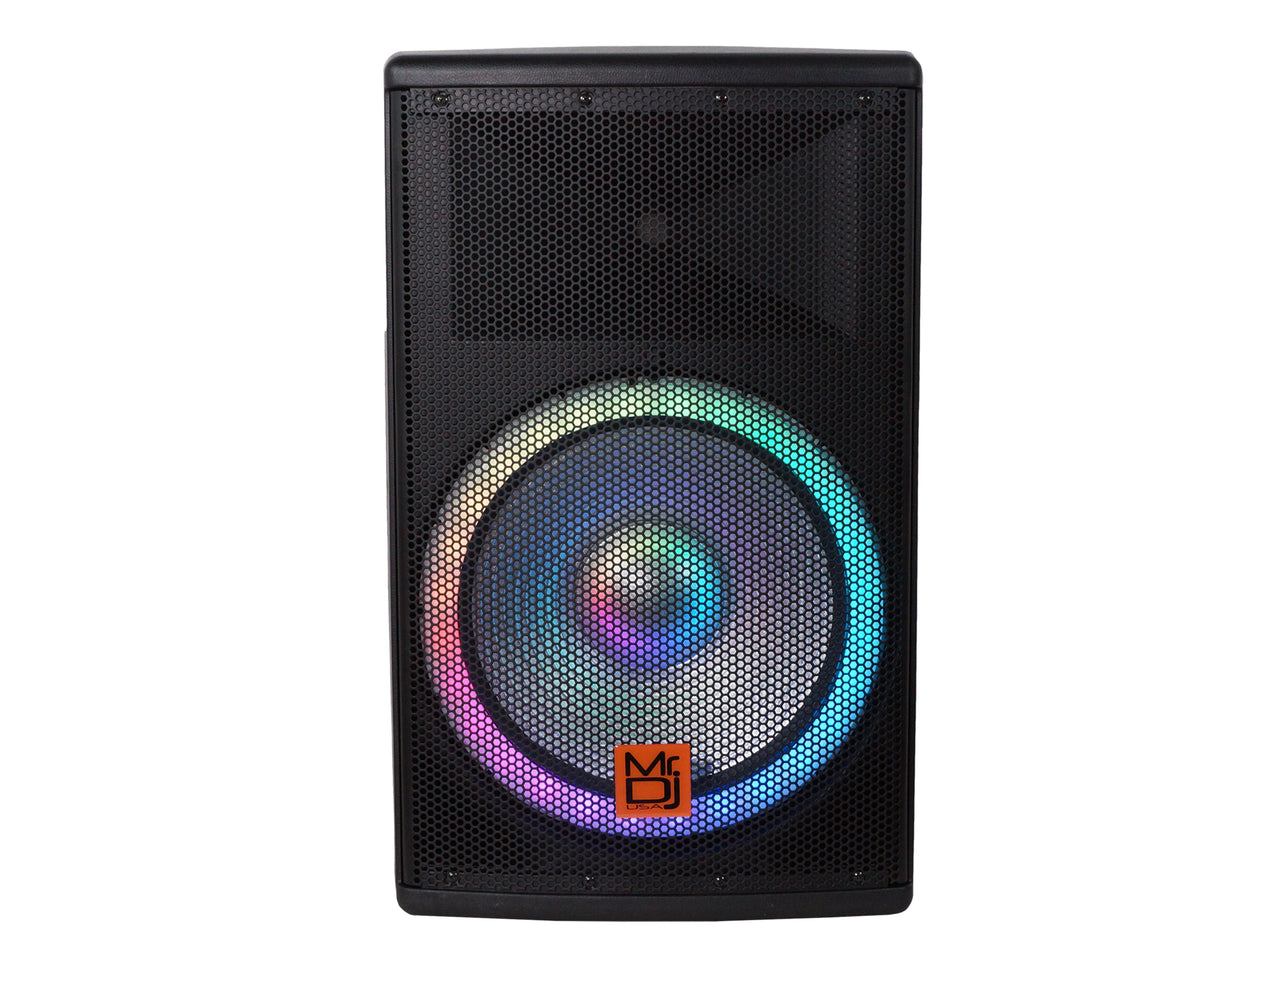 MR DJ SYNERGY15 15" Wireless Portable PA Speaker System 4500W High Powered Bluetooth Indoor and Outdoor DJ PA Sound Stereo Loudspeaker USB SD MP3 AUX Input Flashing Party Light & FM Radio